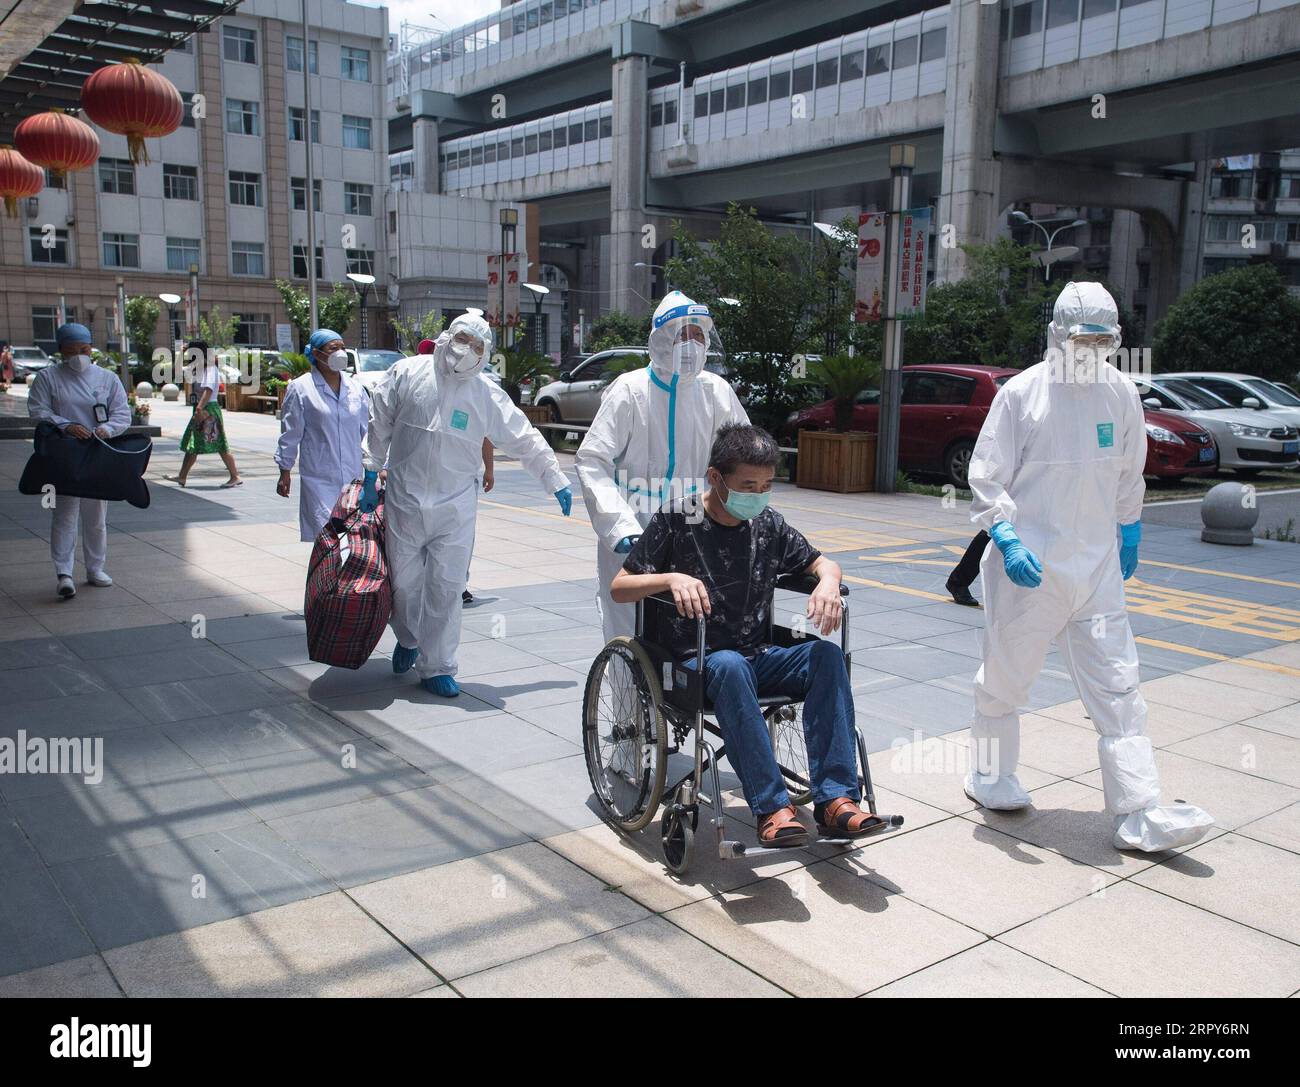 200617 -- WUHAN, June 17, 2020 -- Medical workers push Hu Dingjiang out of hospital at Wuhan Pulmonary Hospital in Wuhan, central China s Hubei Province, June 17, 2020. Hu Dingjiang, 40, a recovered COVID-19 patient, was discharged from Wuhan Pulmonary Hospital on Wednesday after receiving medical treatment and rehabilitation training for more than 100 days. He was diagnosed with the disease in early February, and was hospitalized in the ICU ward as one of the 81 severe COVID-19 cases in the hospital. The functions of his lungs recovered on April 5 with 40 days of extracorporeal membrane oxyge Stock Photo